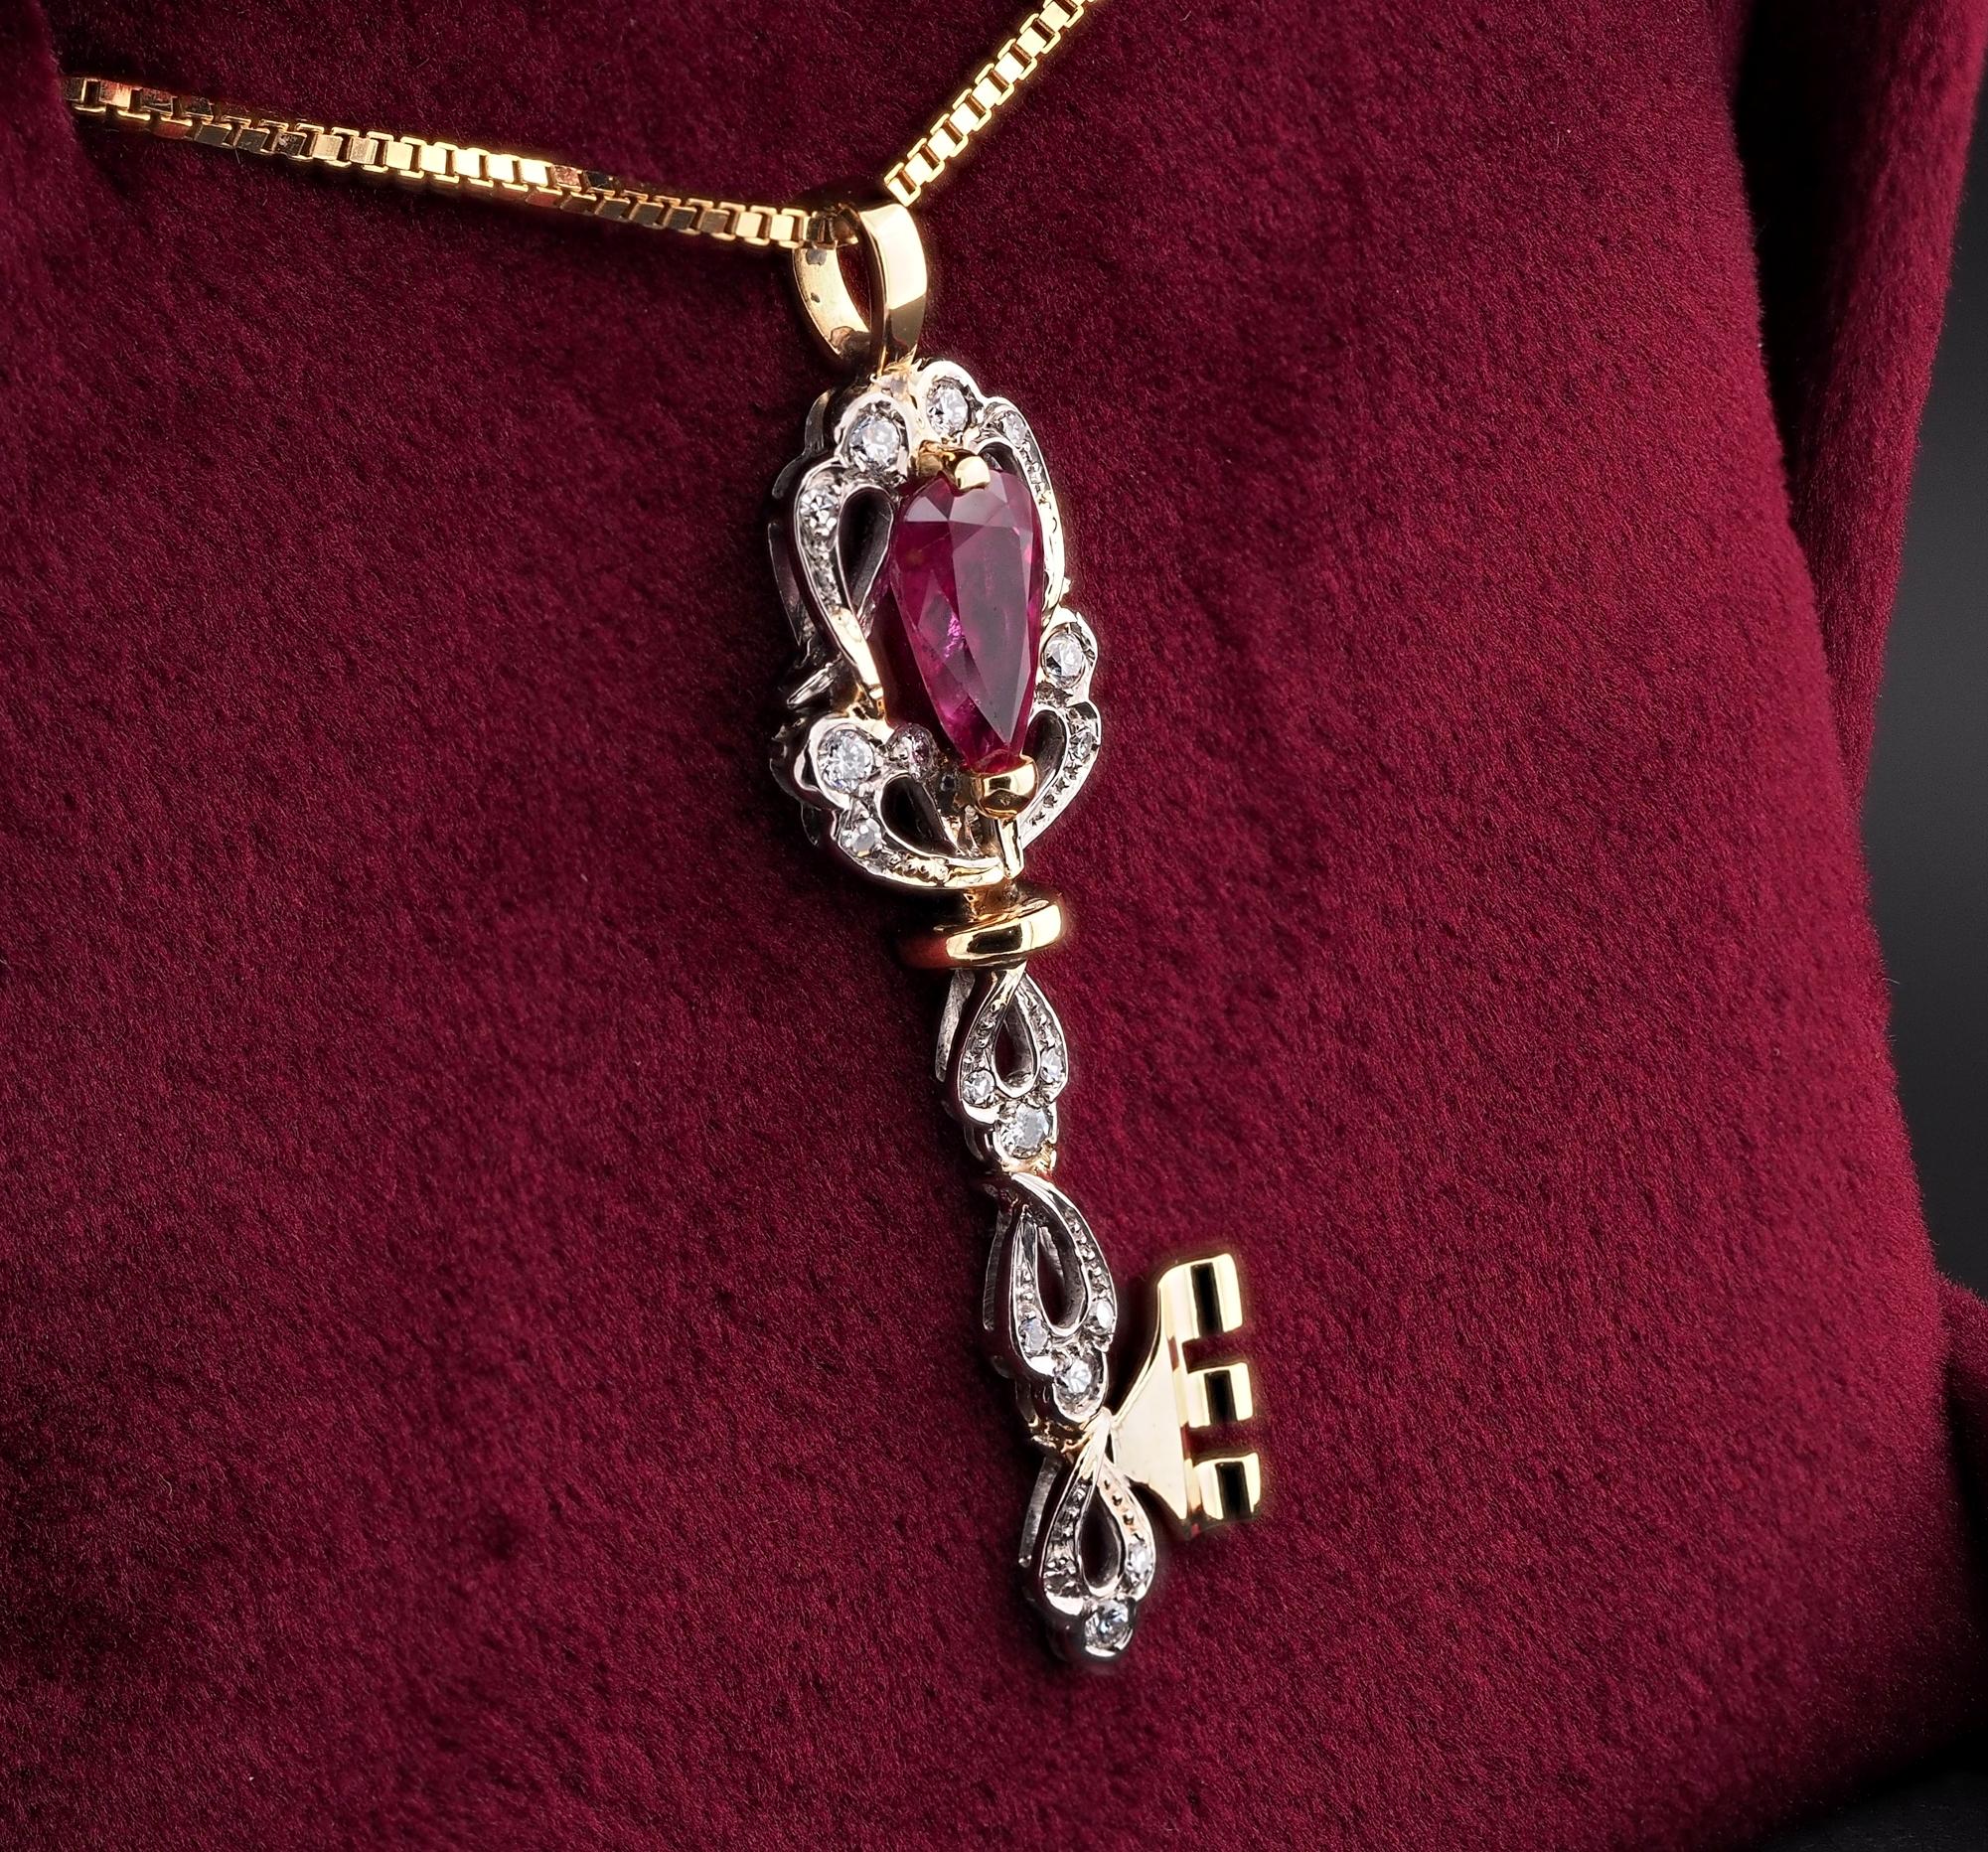 Contemporary Estate 2.20 Ct. Natural Ruby Diamond Key Pendant Necklace 18 KT For Sale